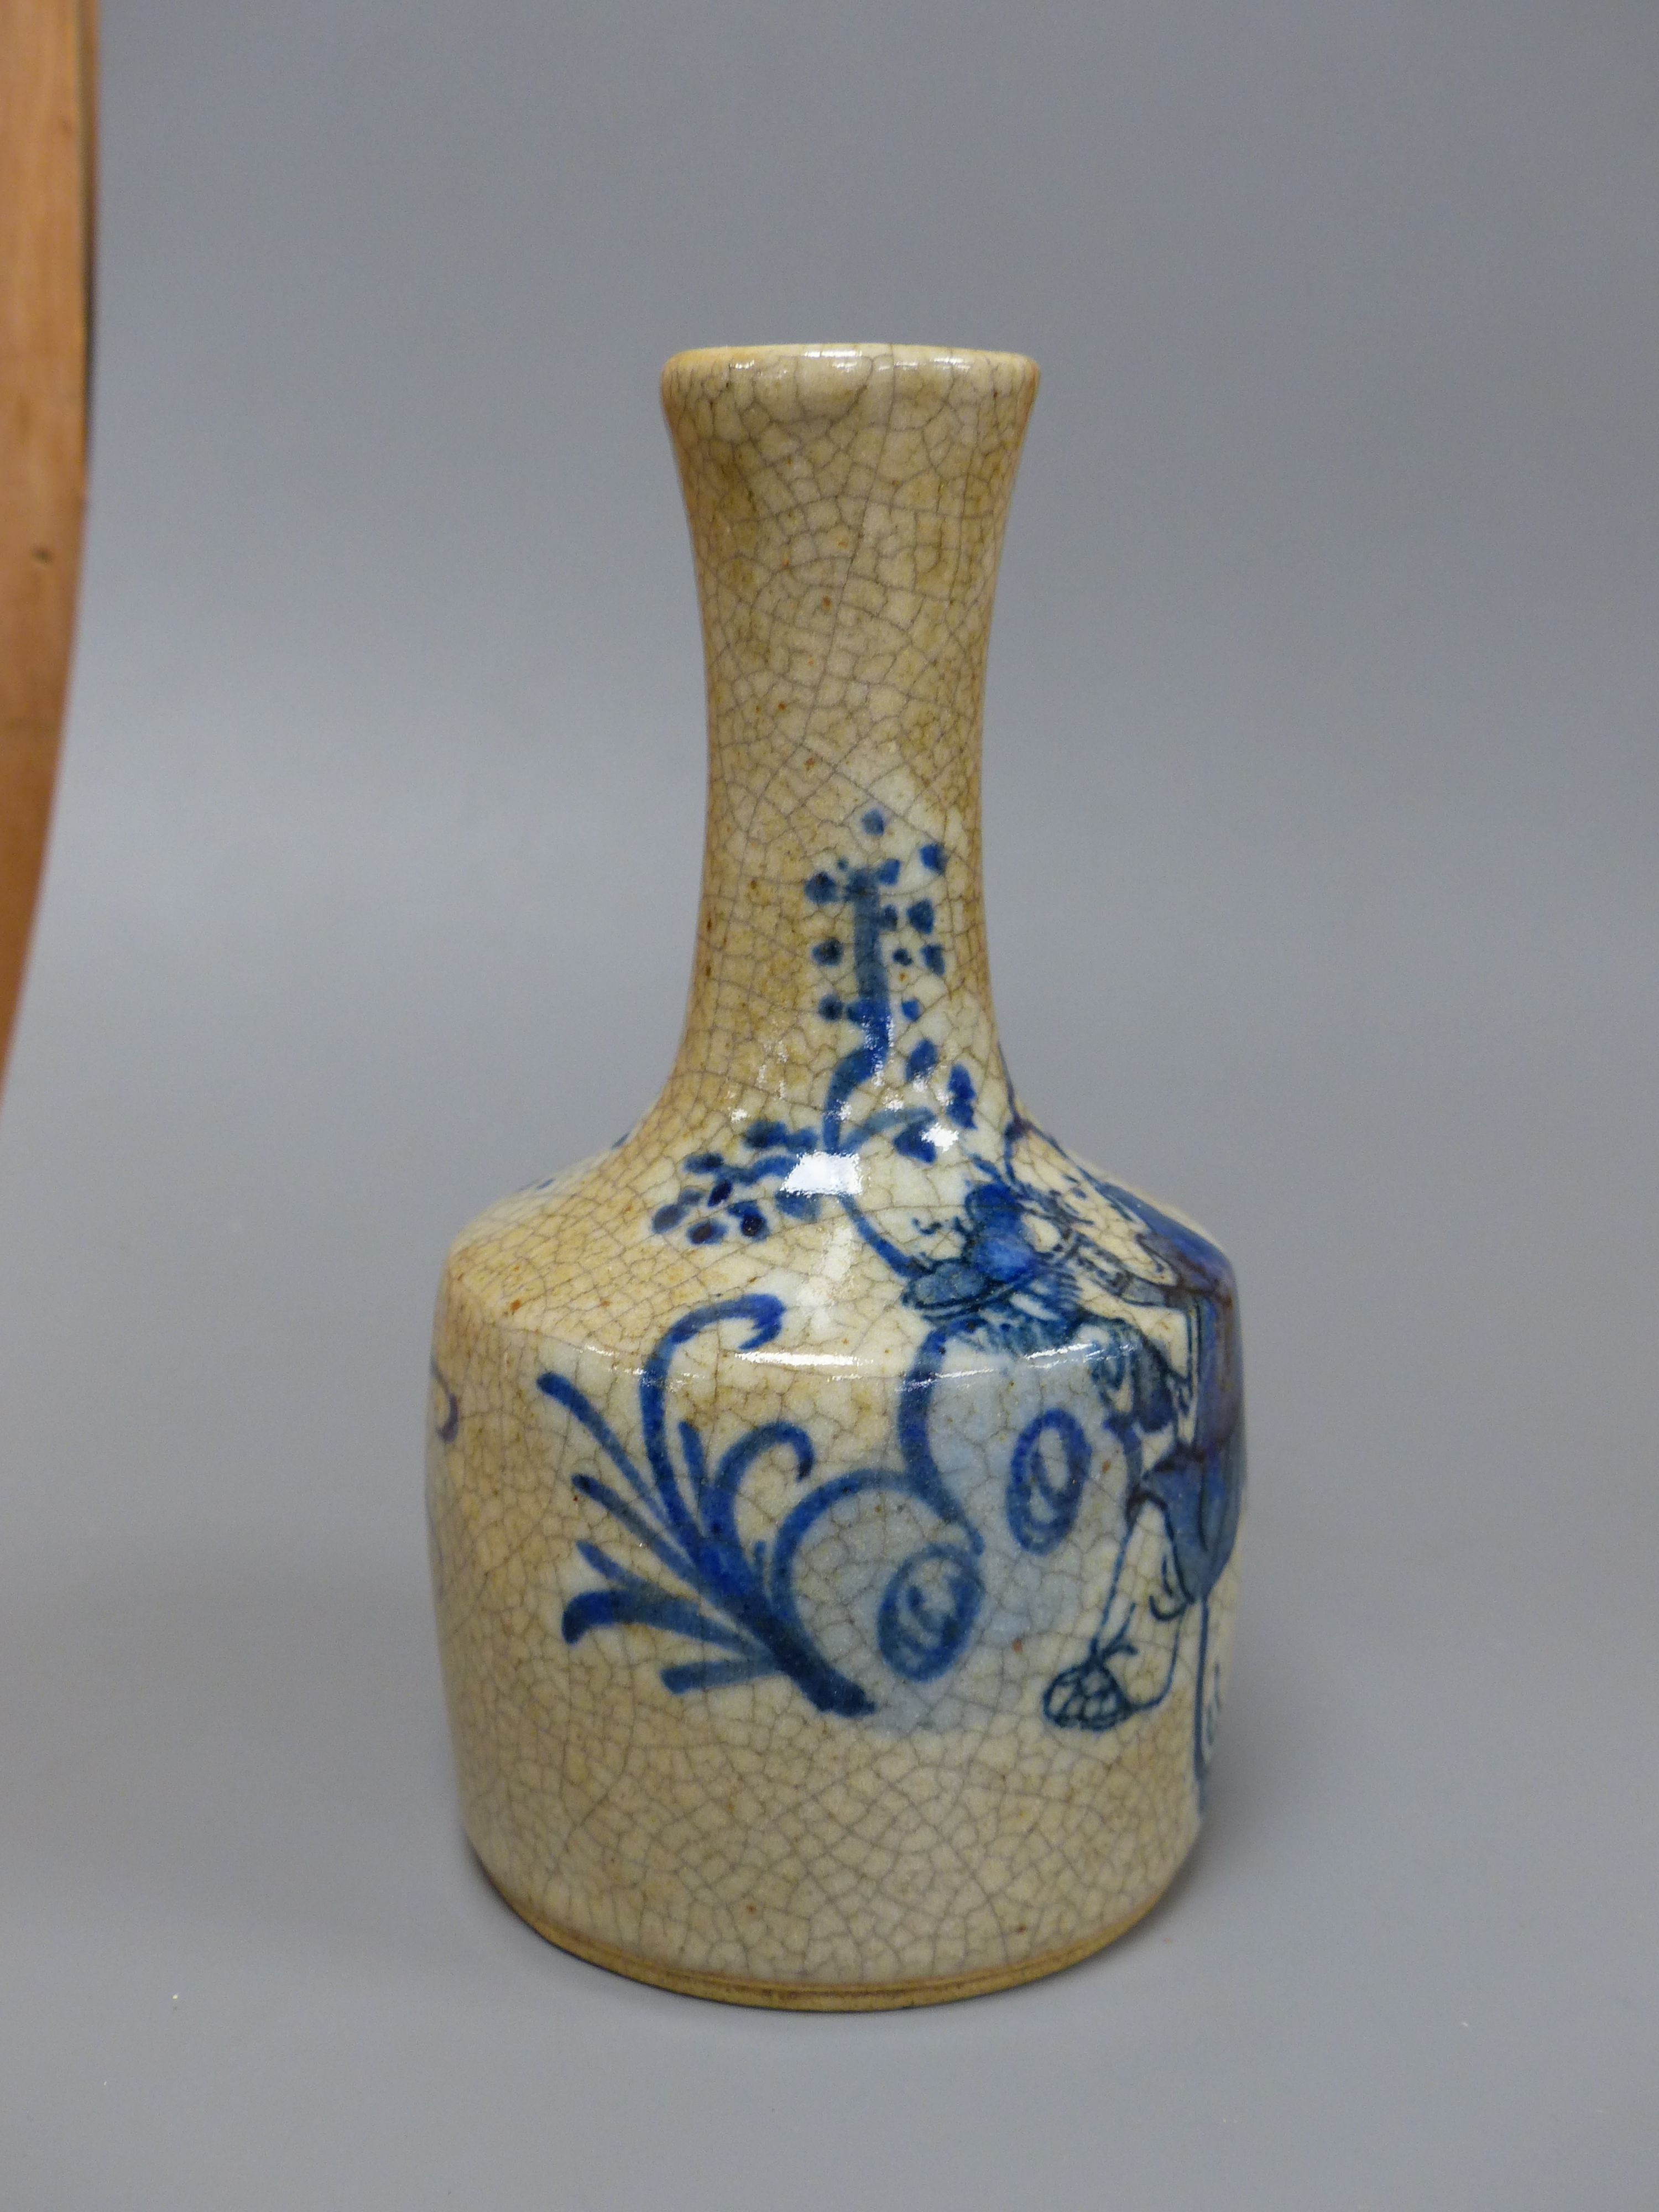 A Chinese blue and white crackle glaze bottle vase, height 15cm